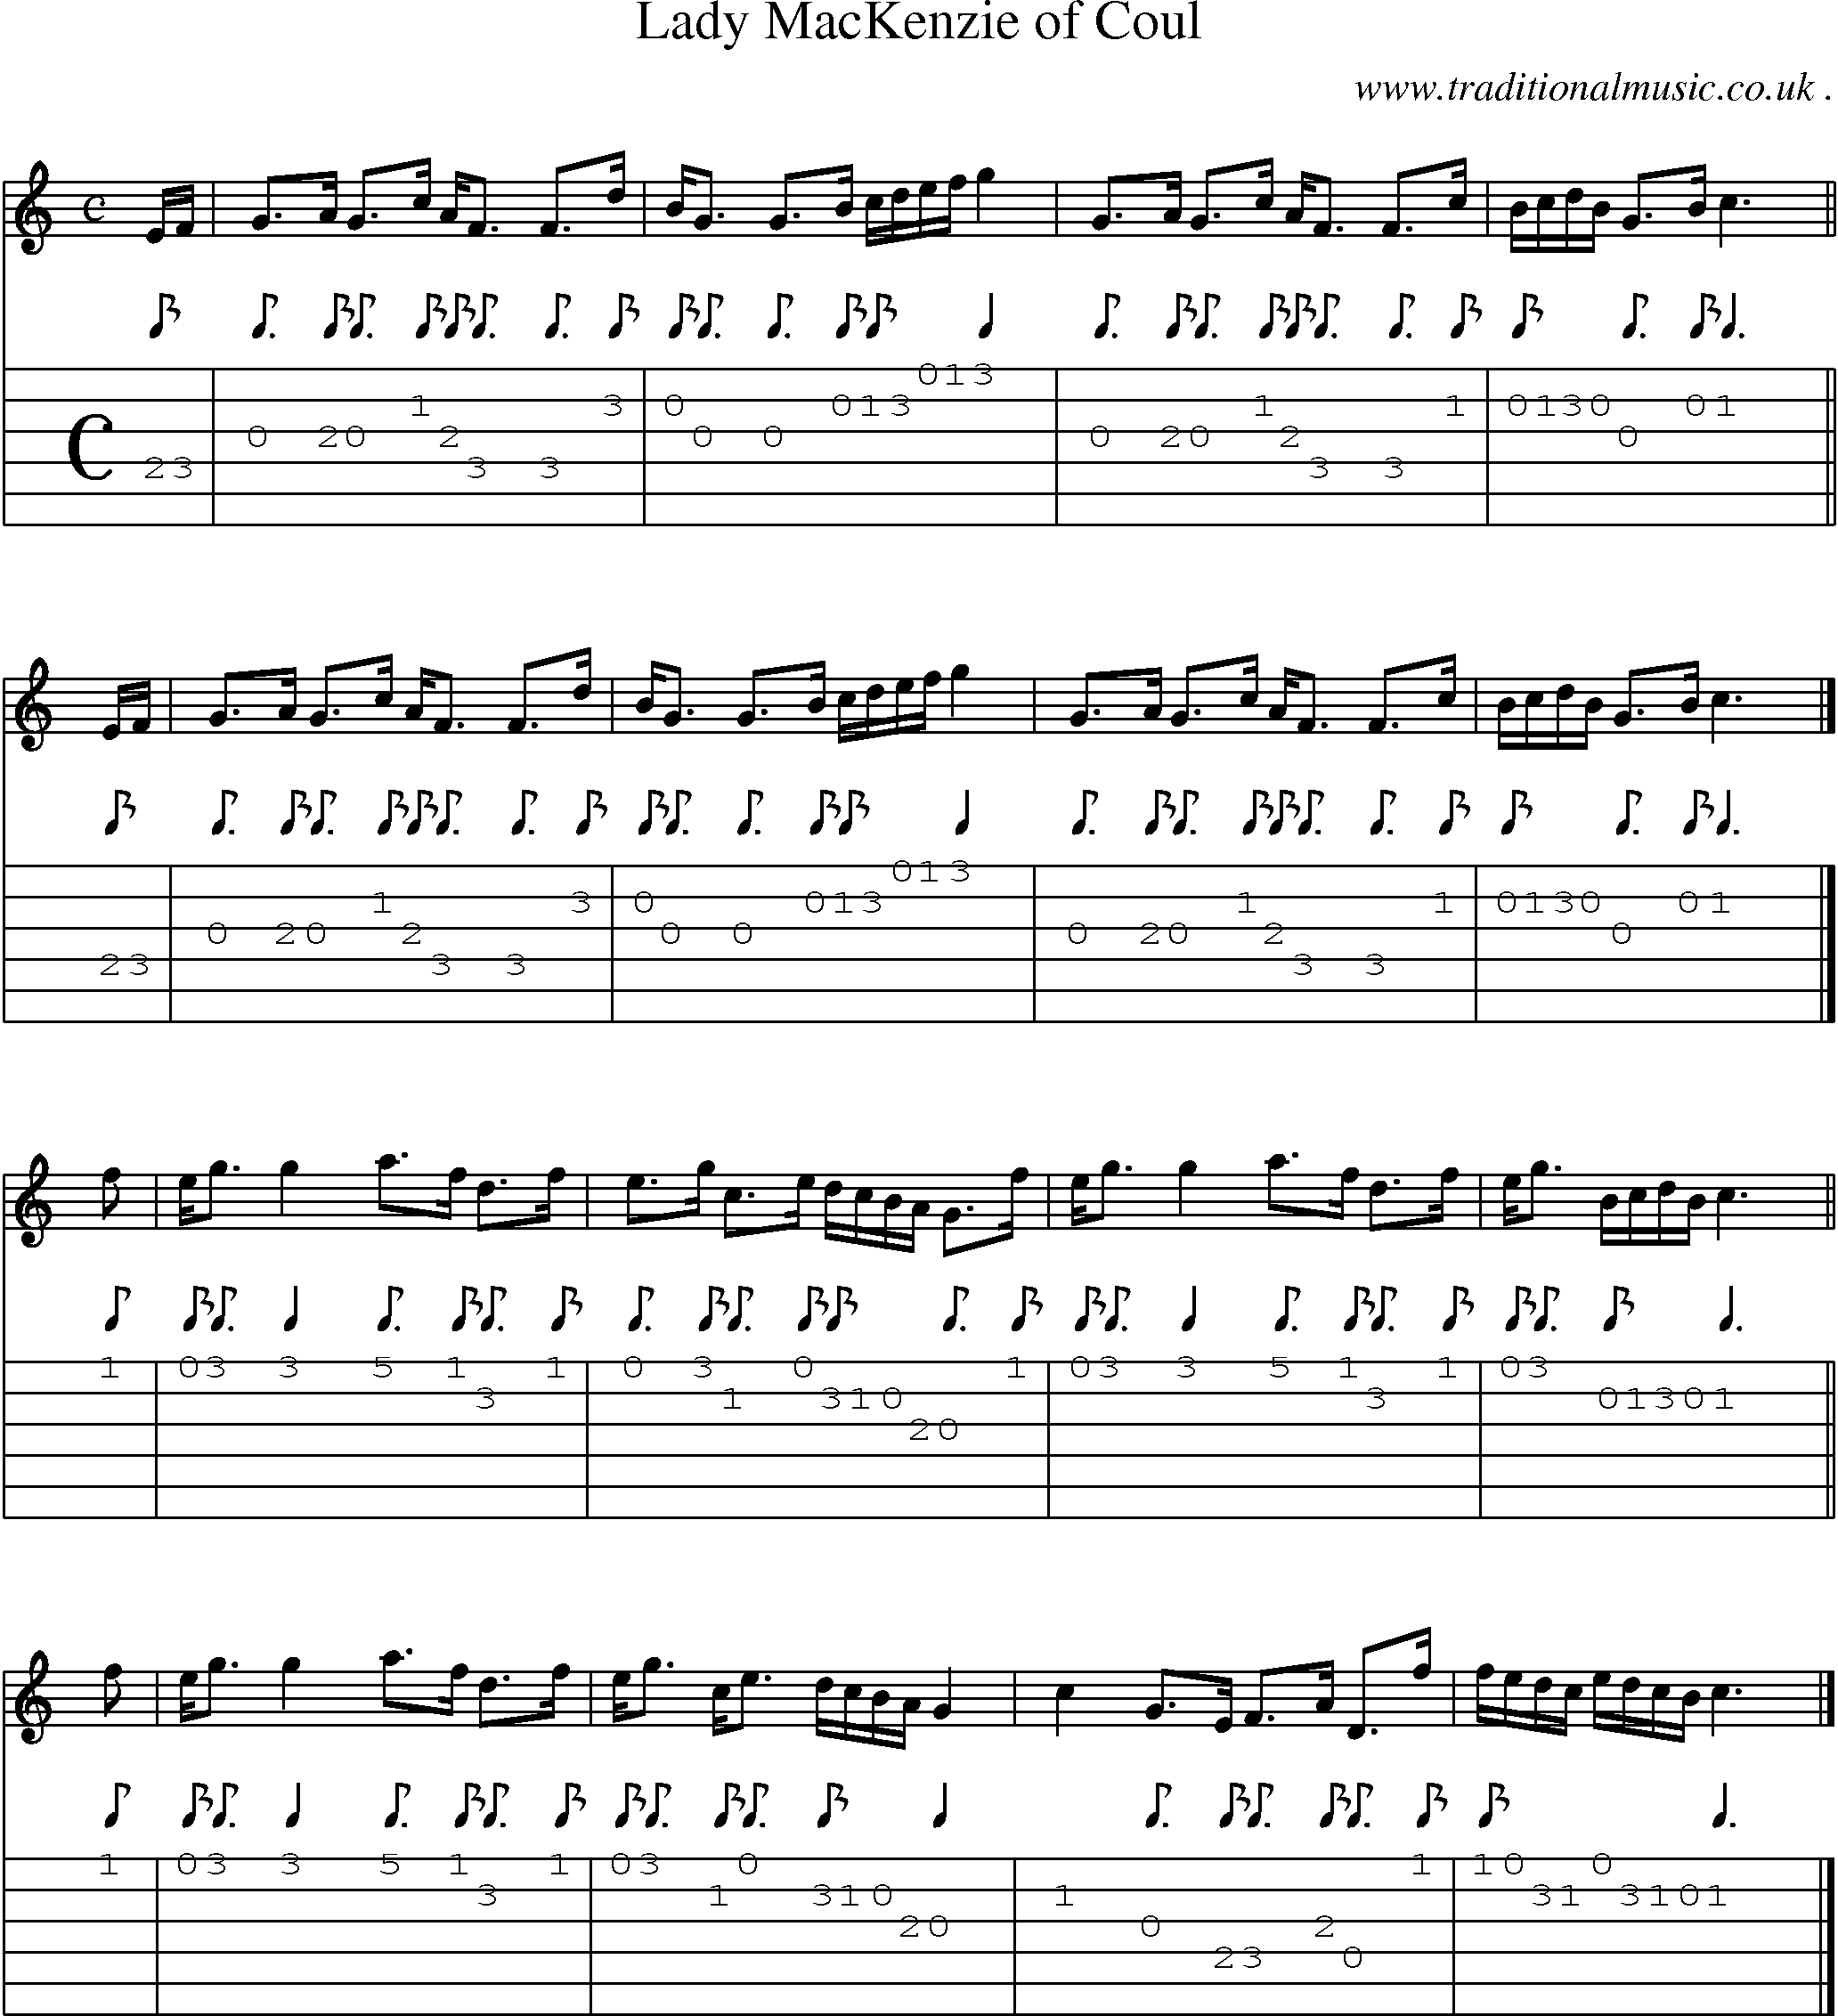 Sheet-music  score, Chords and Guitar Tabs for Lady Mackenzie Of Coul